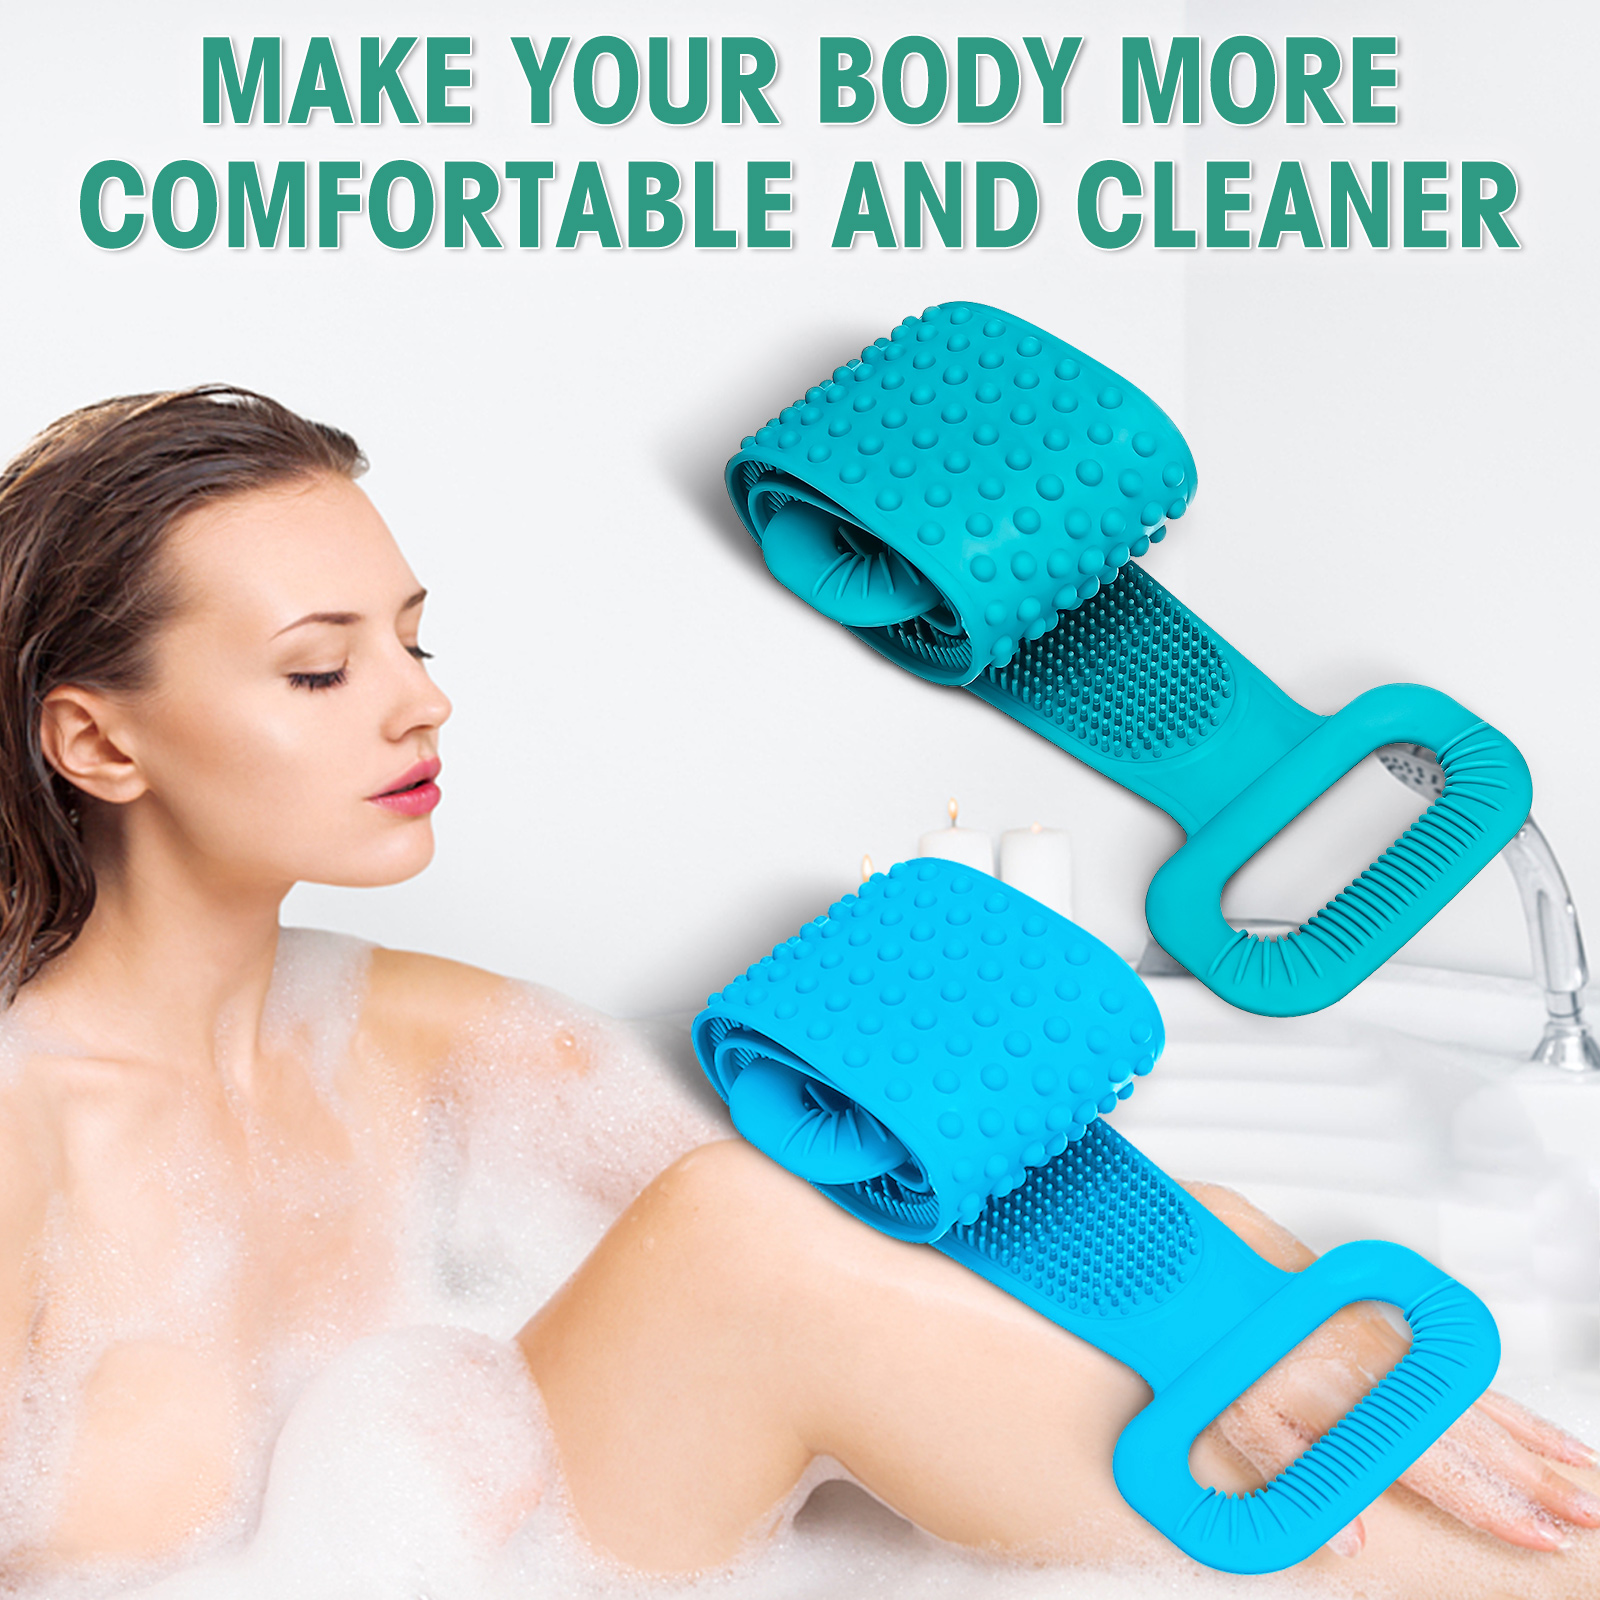 CHARMINER-Multifunctional-Silicone-Durable-Back-Scrubber-Skin-friendly-Body-Brush-1890639-2